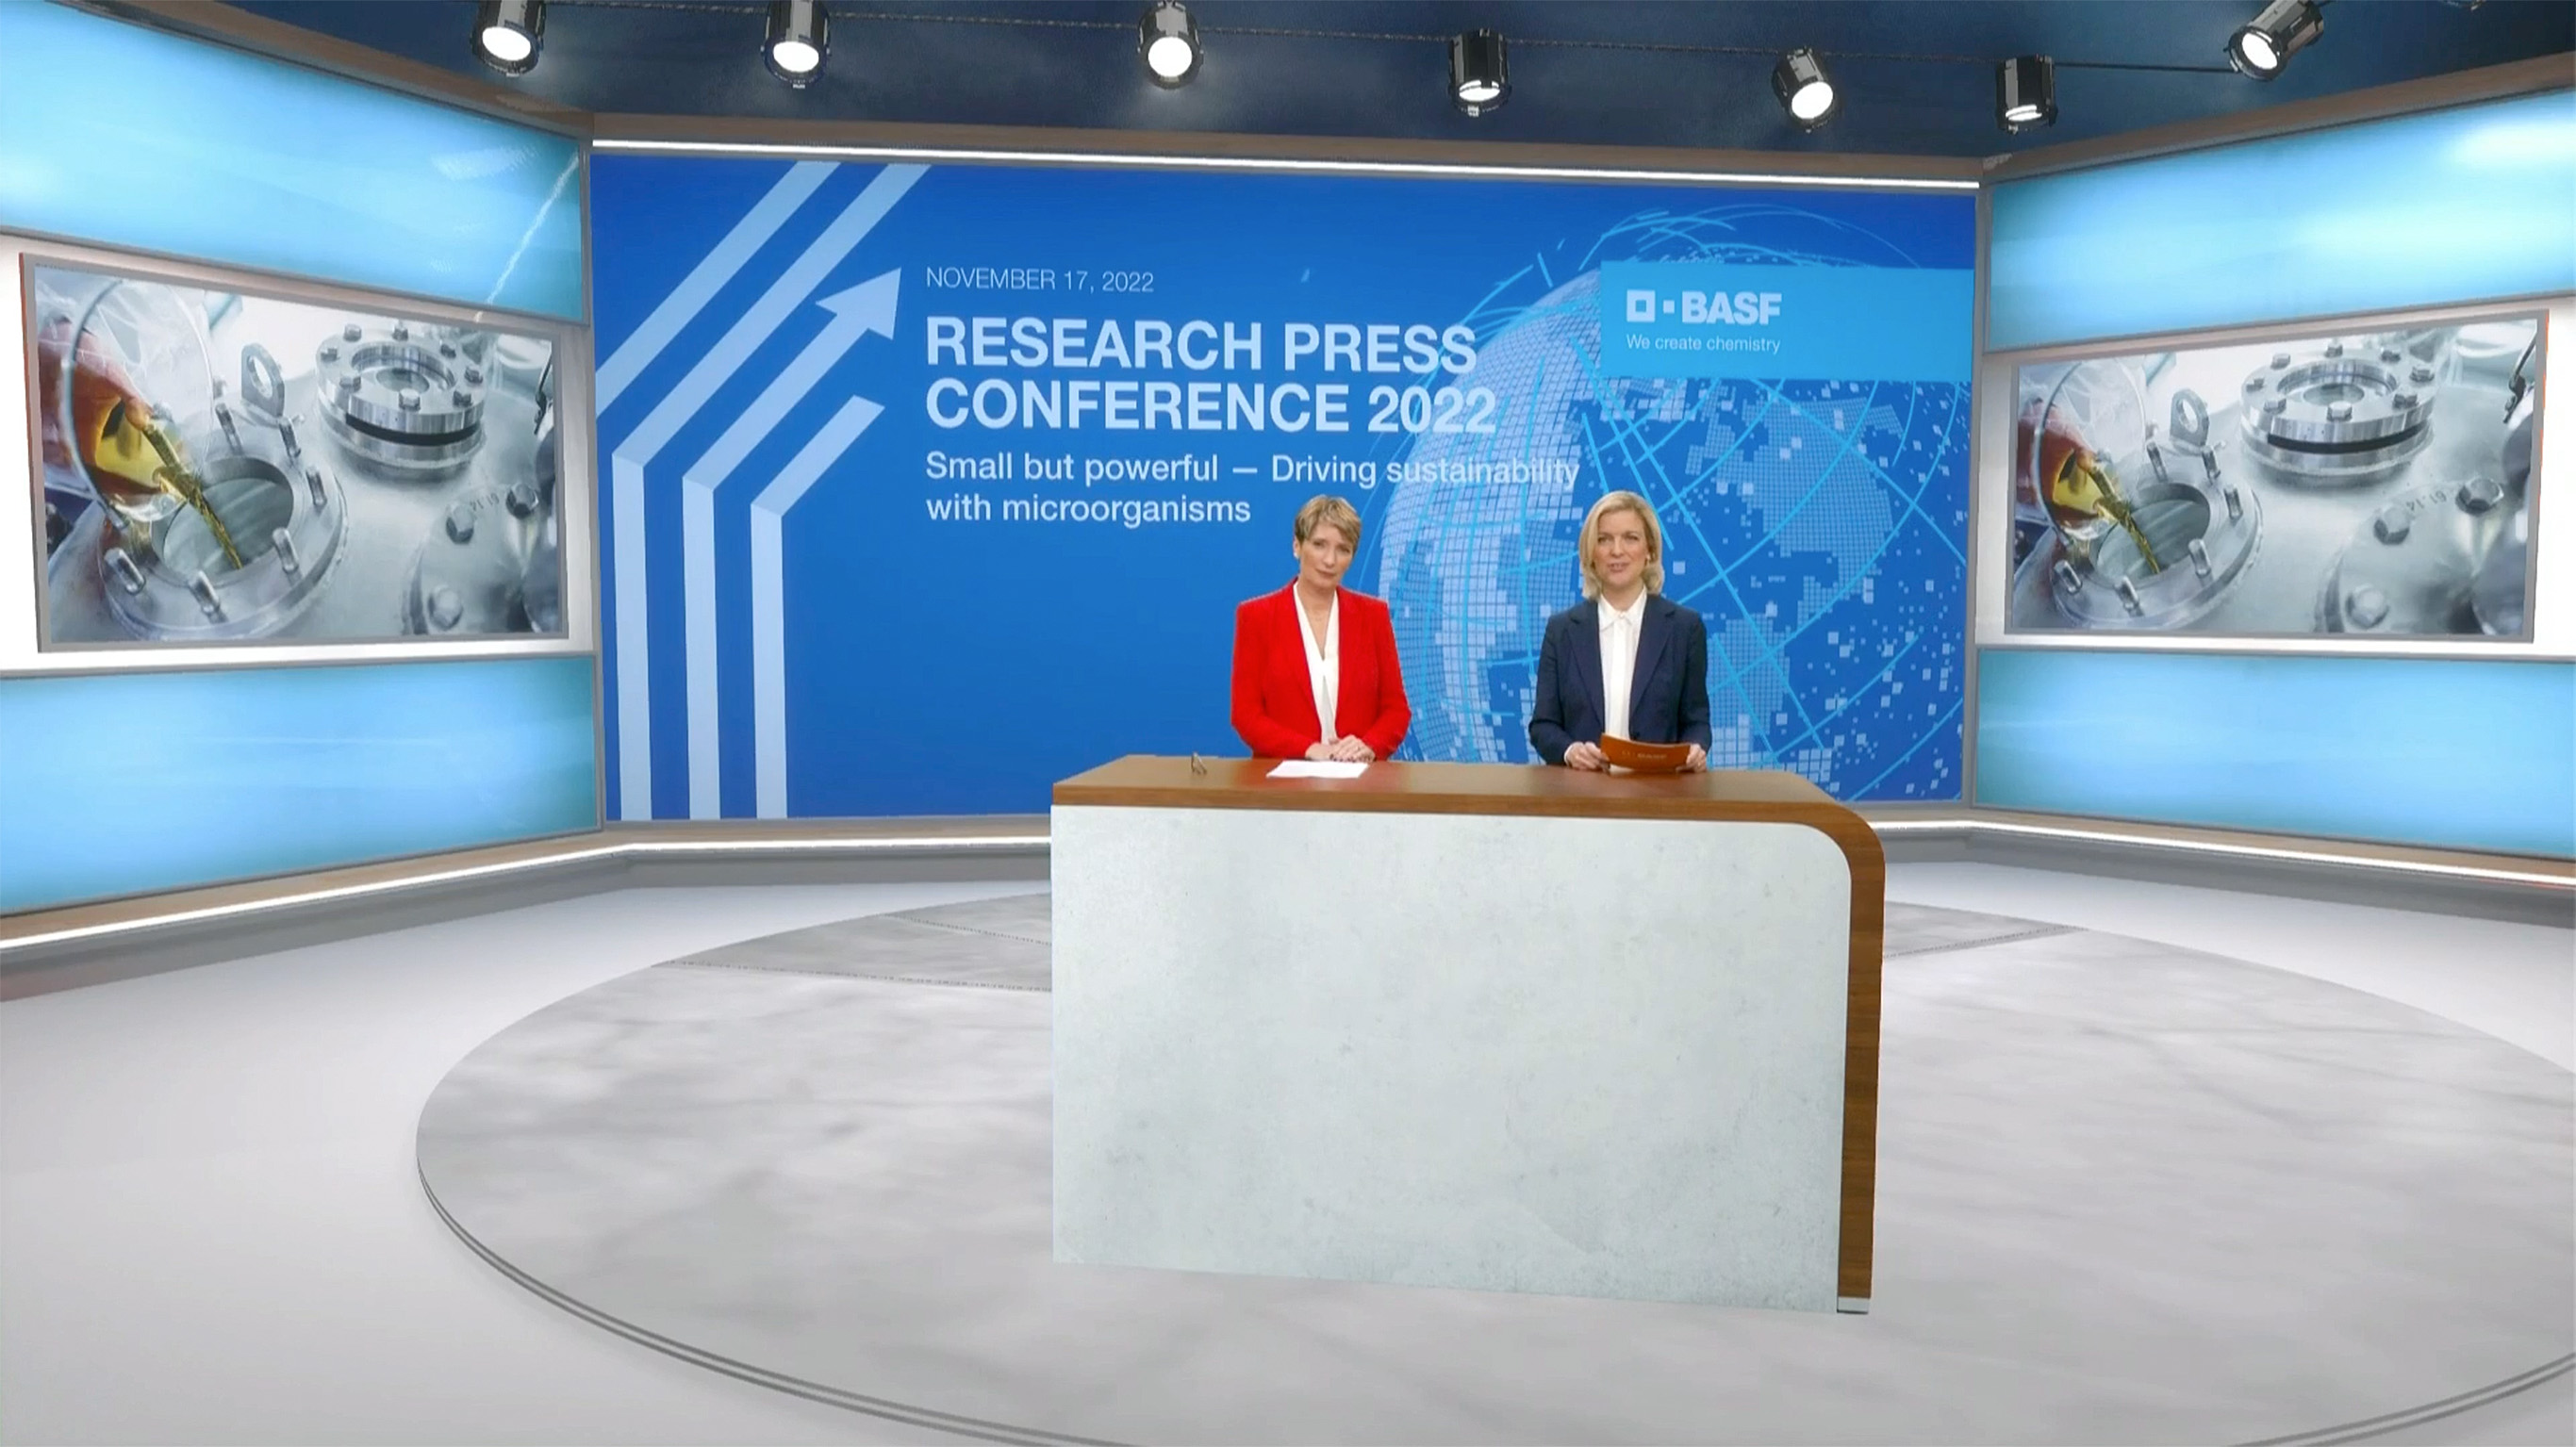 Dr. Melanie Maas-Brunner, Member of the Board of Executive Directors and Chief Technology Officer at BASF, (left) and Dr. Nina Schwab-Hautzinger, Corporate Communications & Government Relations, kick off the BASF Research Press Conference 2022.